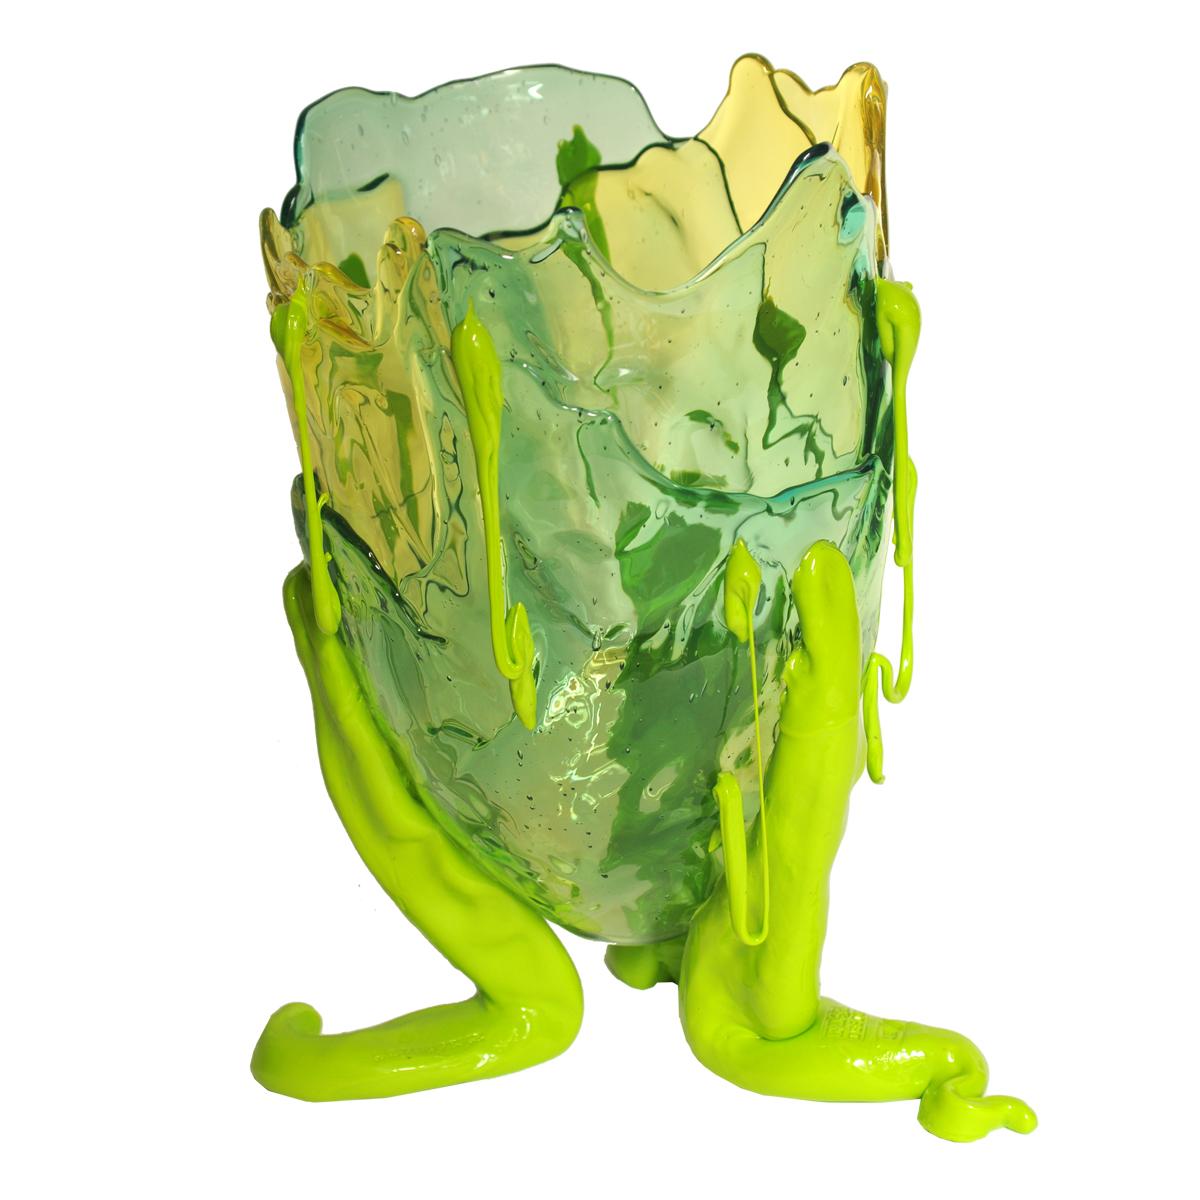 Contemporary Gaetano Pesce Clear Special XL Vase Resin Yellow, Lime, Turquoise In New Condition For Sale In barasso, IT